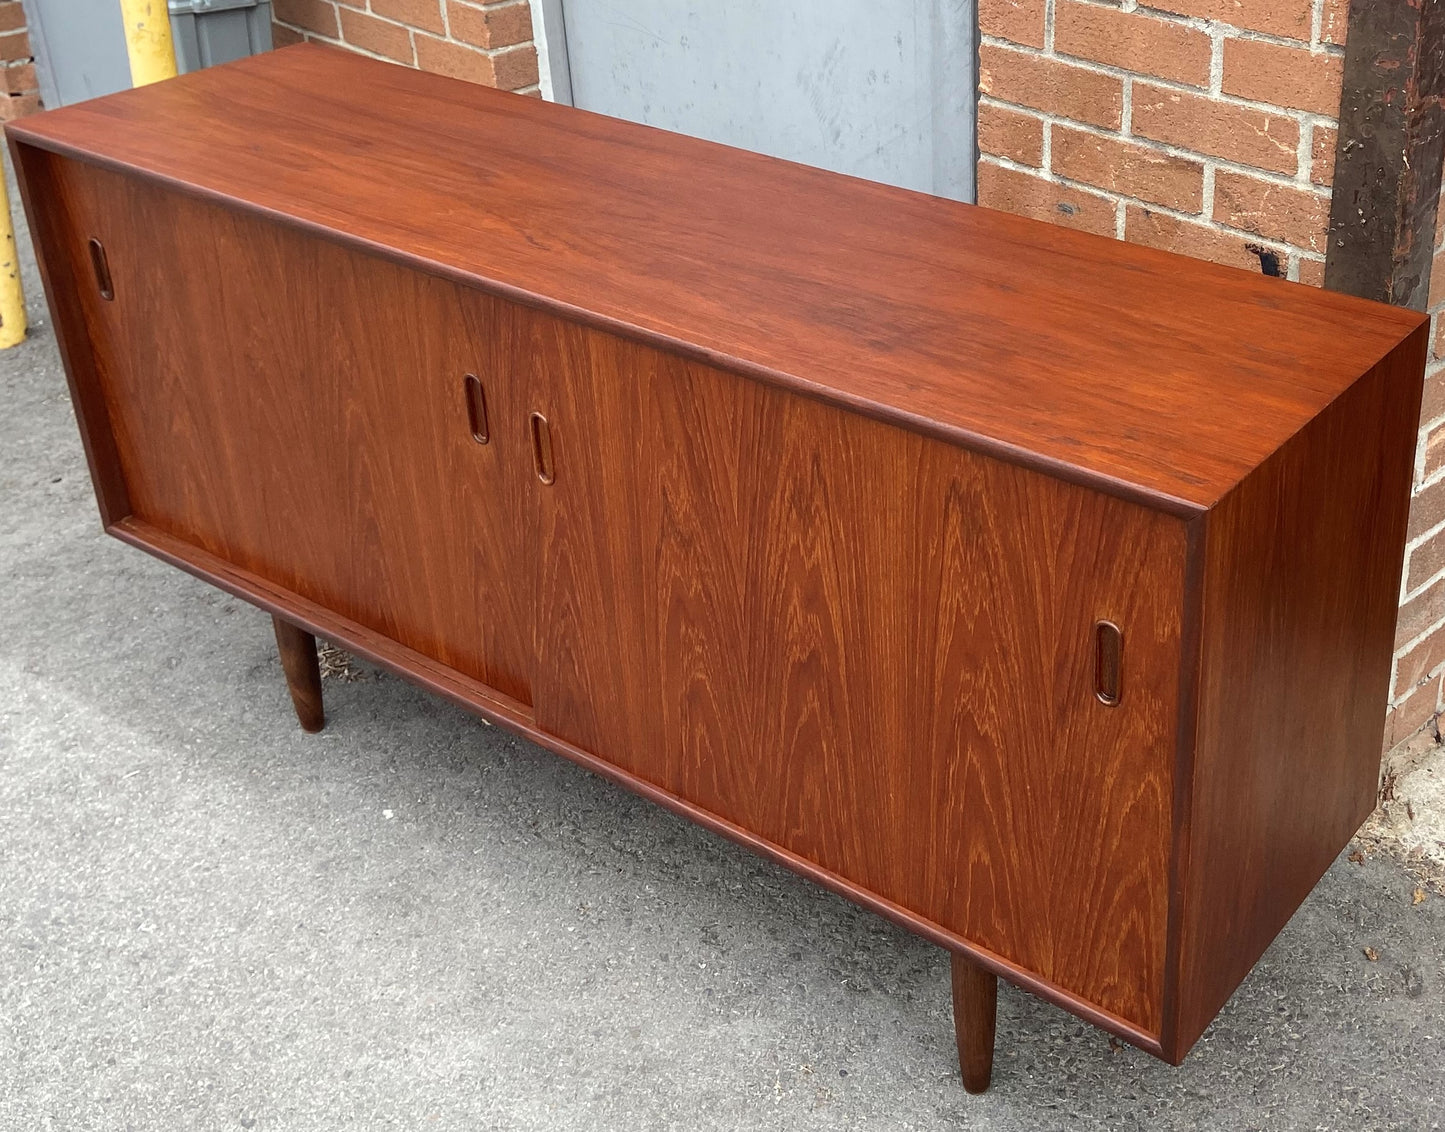 REFINISHE MCM Teak Sideboard by Punch 60", Perfect